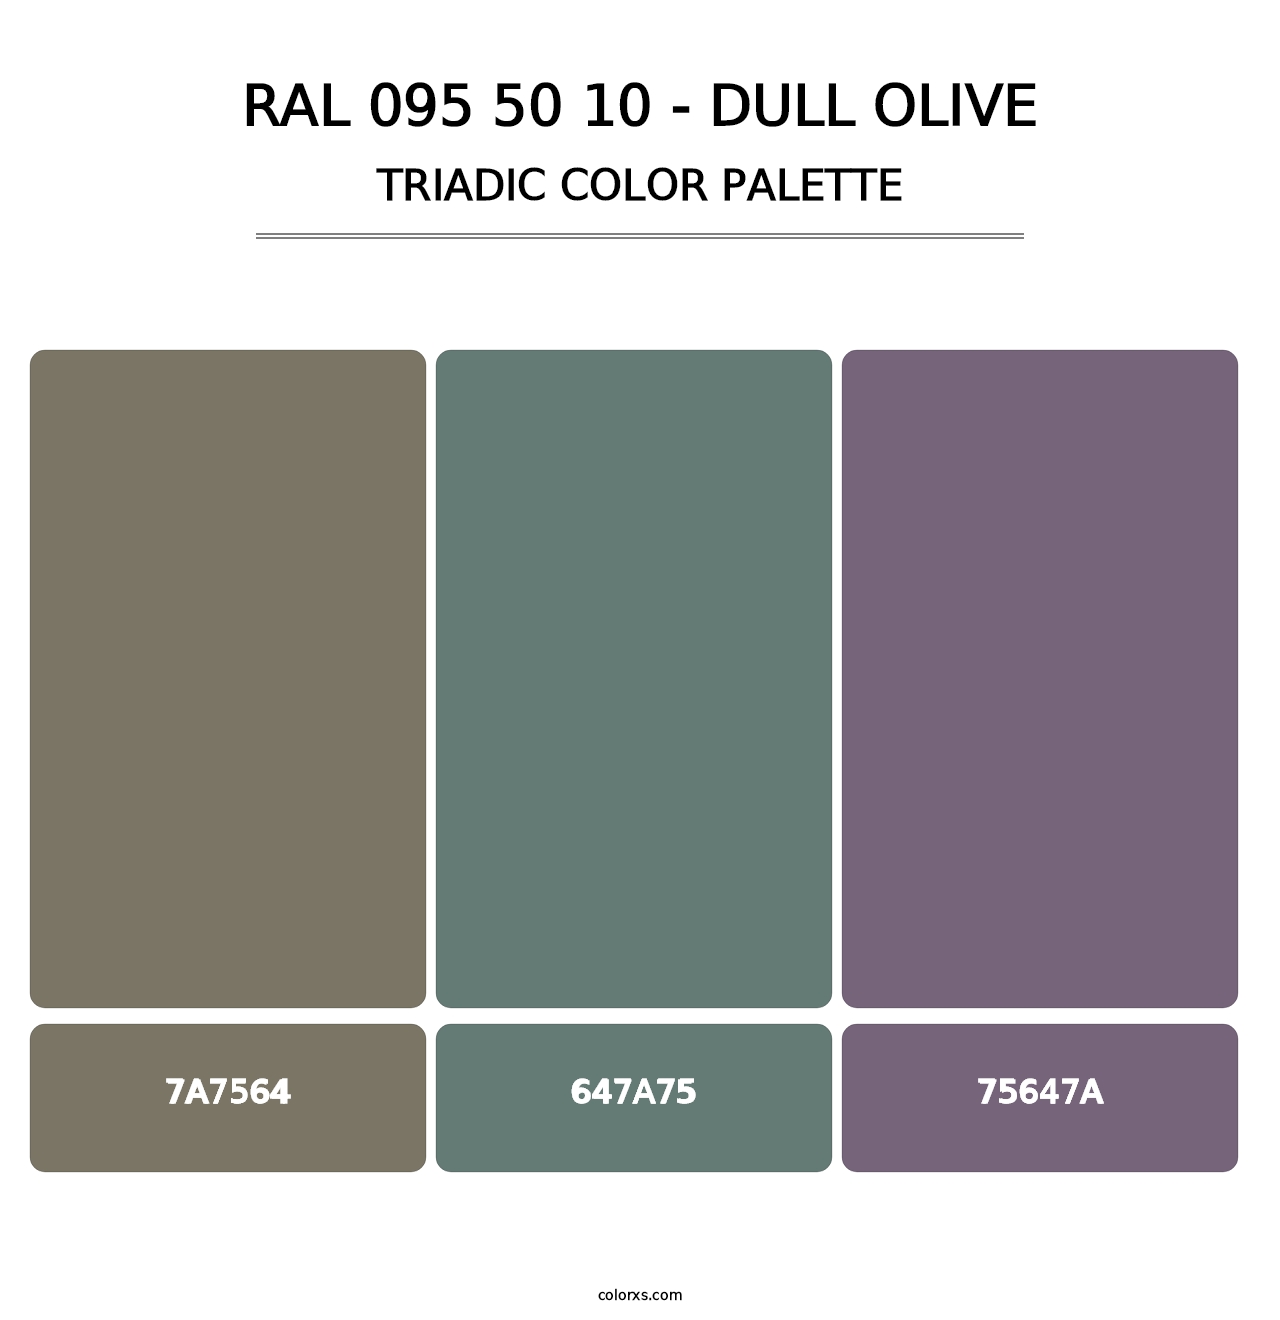 RAL 095 50 10 - Dull Olive - Triadic Color Palette